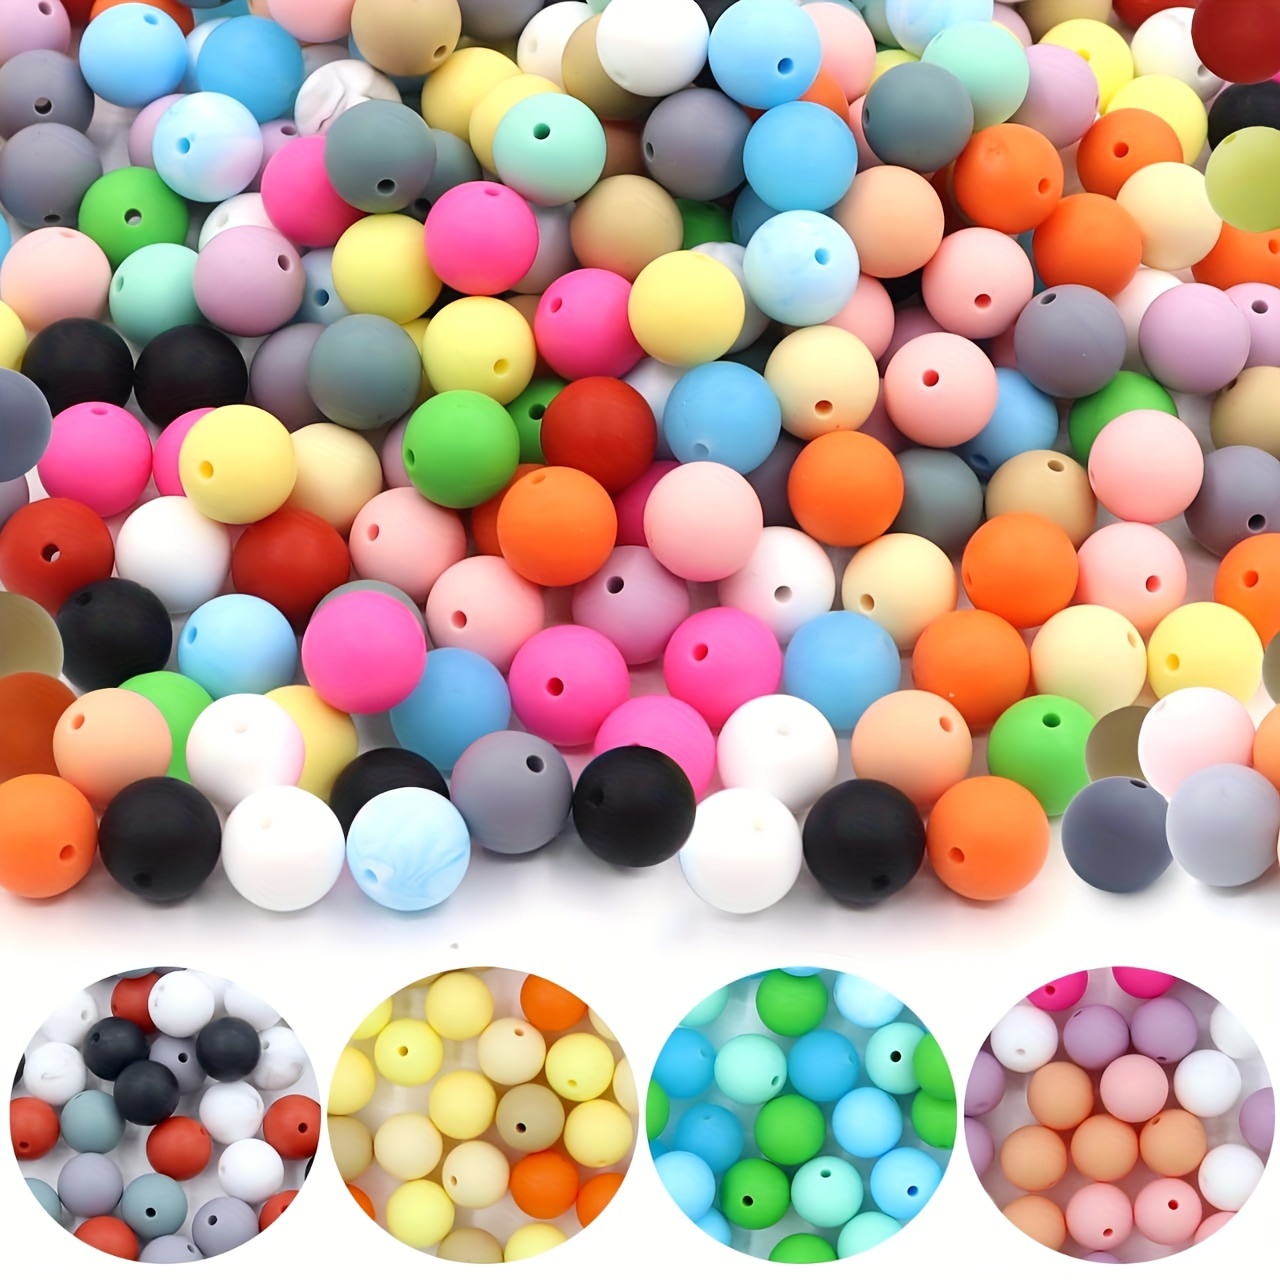 105 PCS Silicone Beads Kit, 15mm Silicone Beads for Keychain Making Large  Silicone Beads Bulk Round Rubber Beads with Lanyard & Key Chain Ring for  DIY